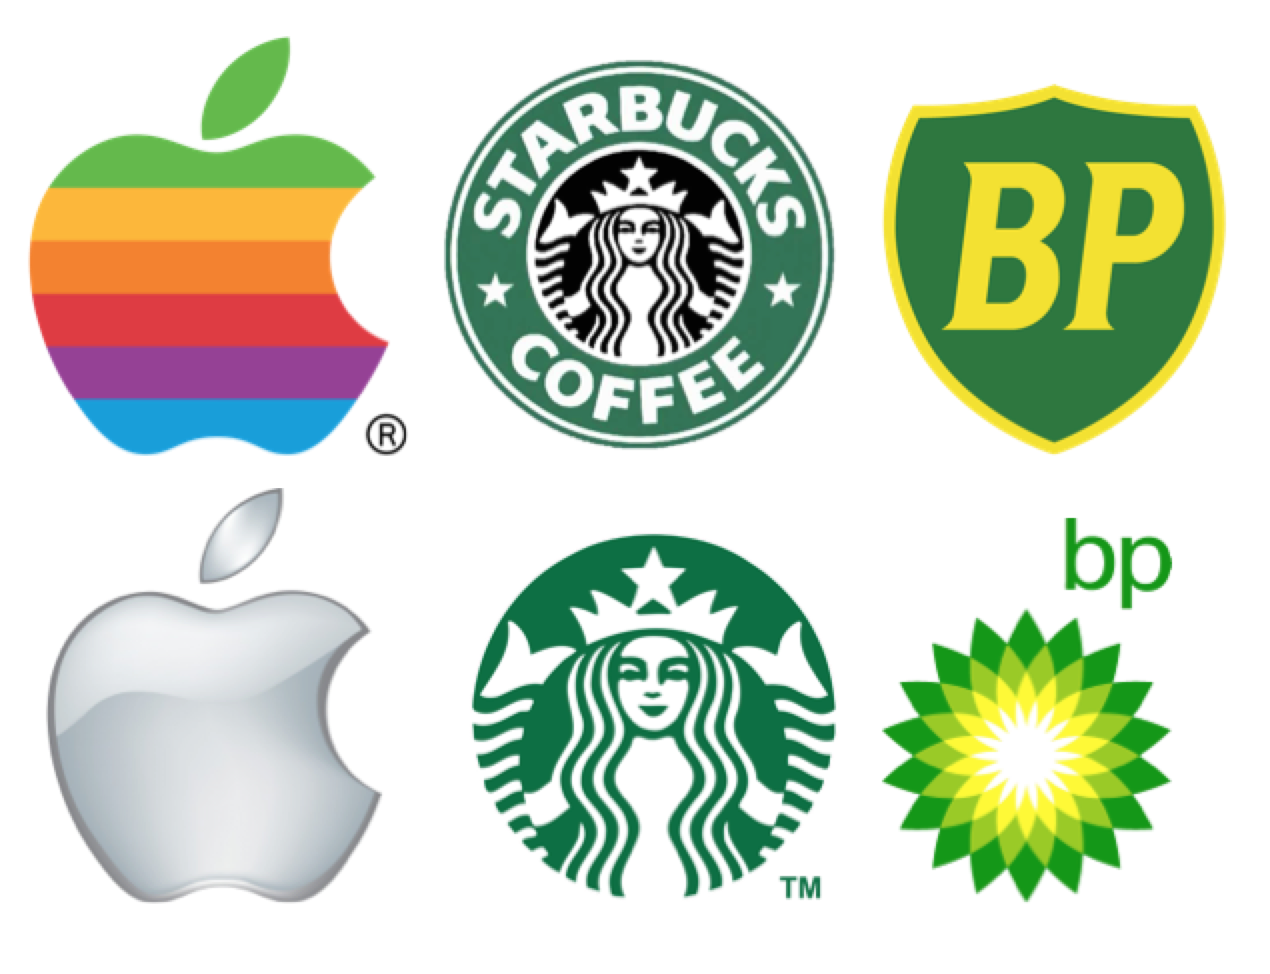 Rebranding: The good, the bad and the ugly